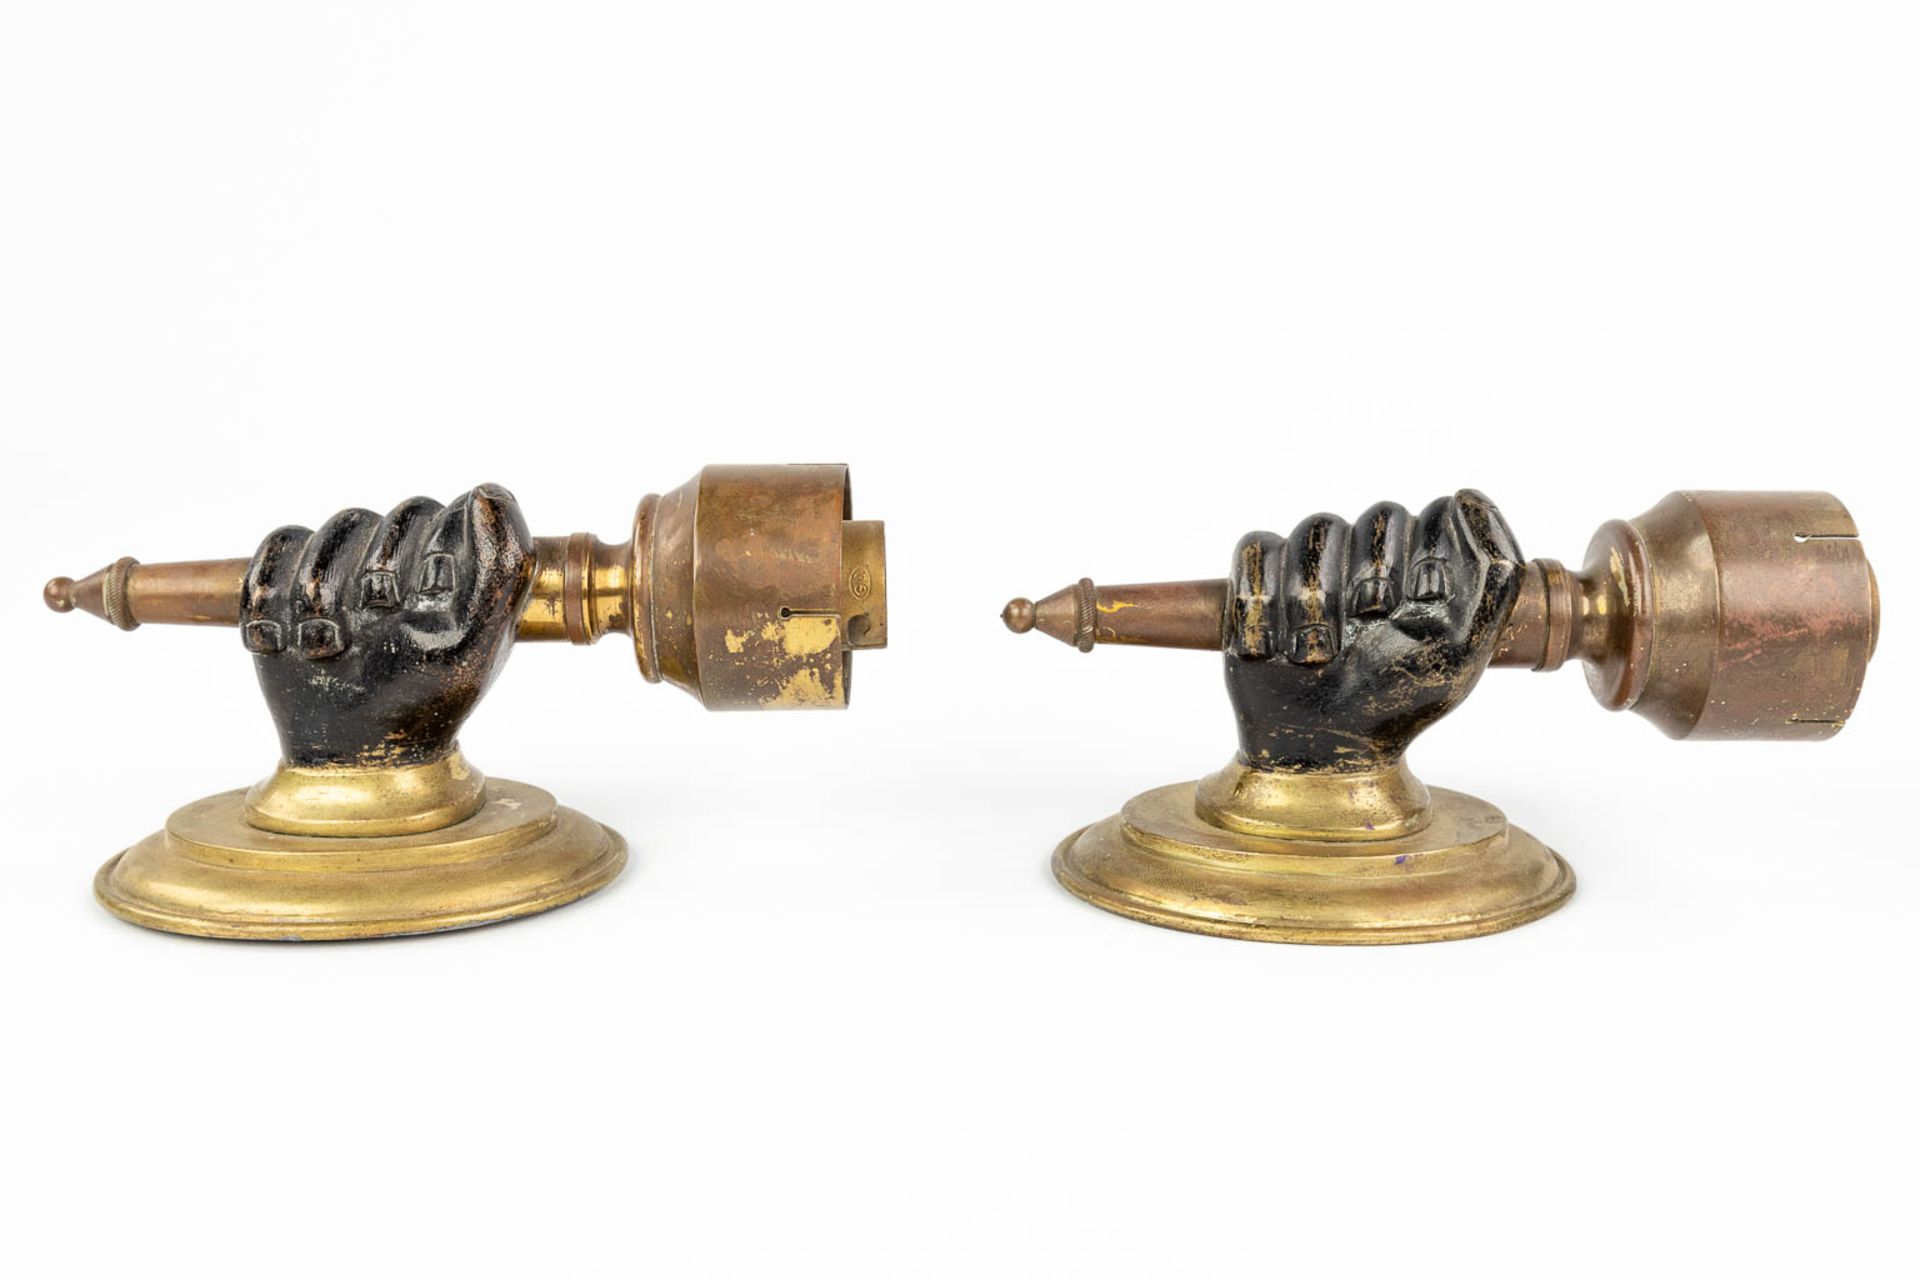 A pair of wall lamps in the shape of a hand with torch, circa 1900. (L:8 x W:7,5 x H:15 cm) - Image 10 of 10